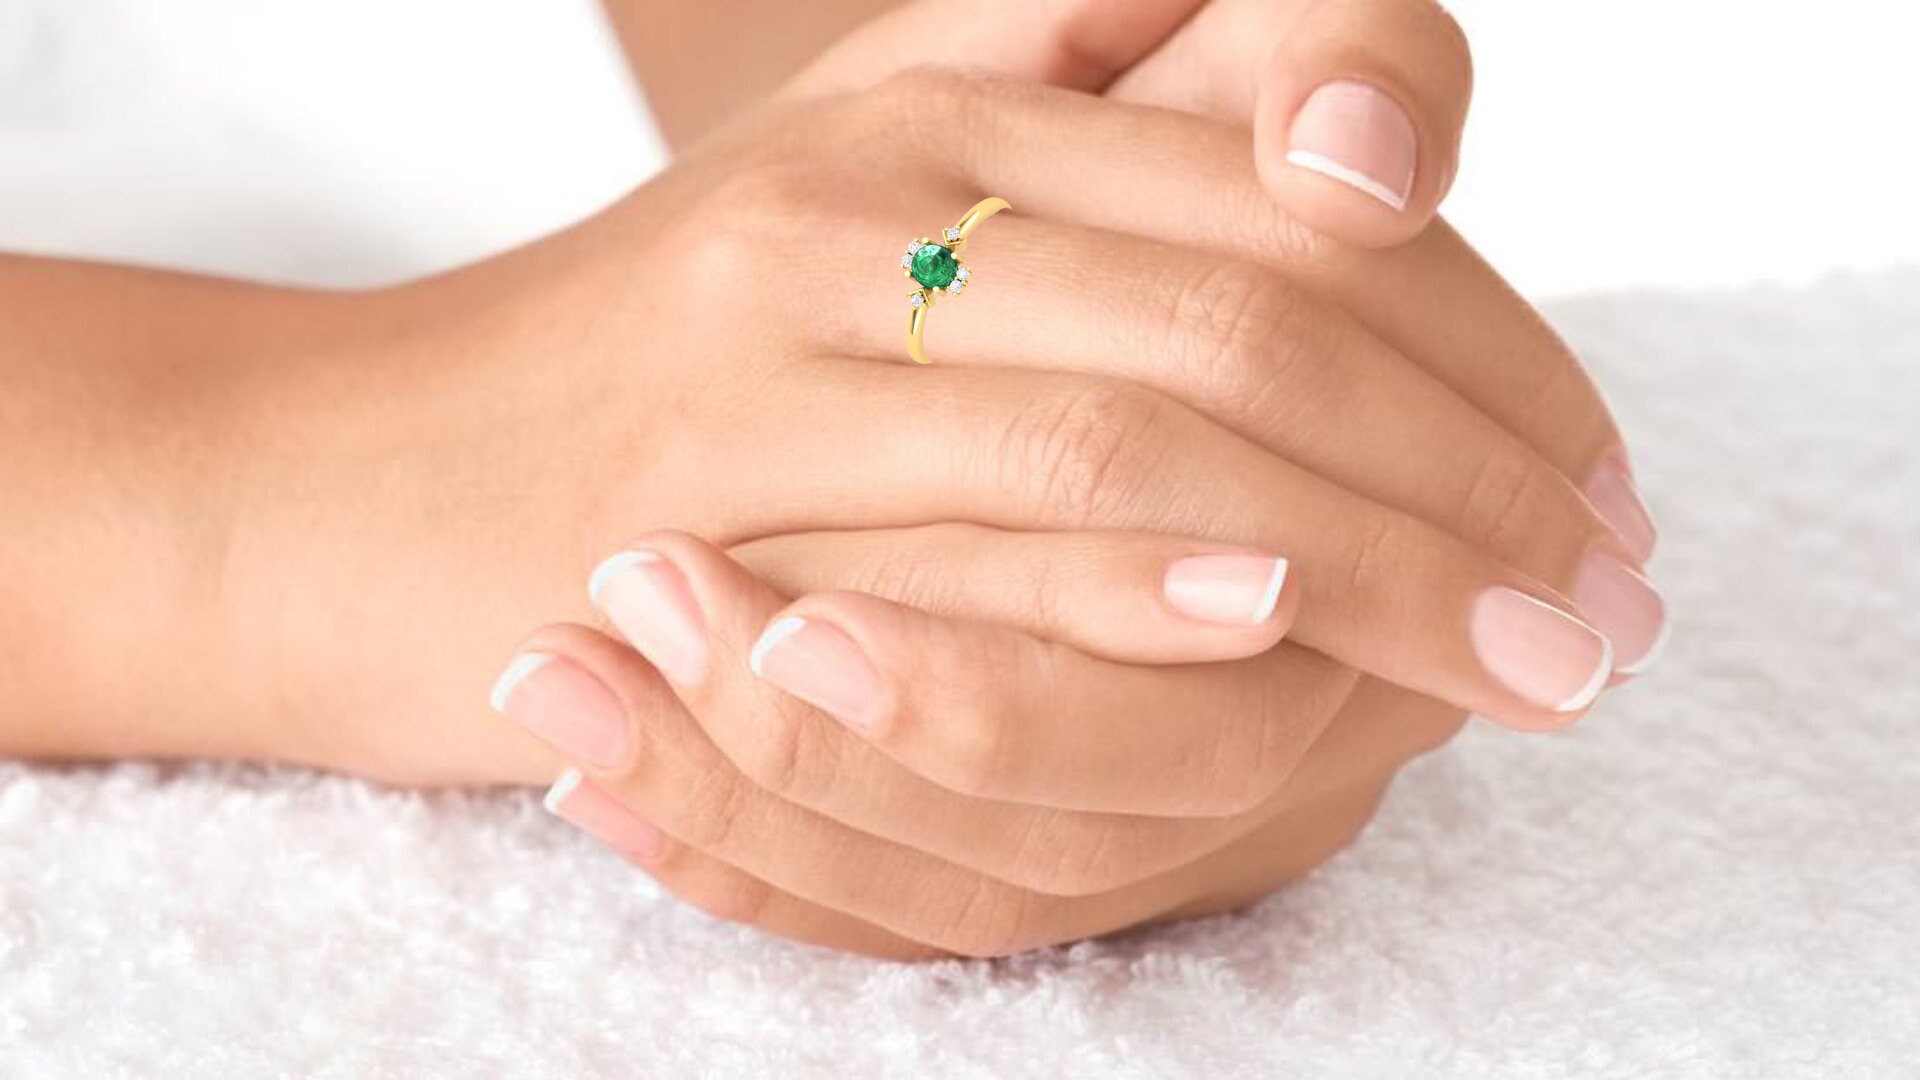 Dainty 14K Gold Natural Emerald Ring, Everyday Gemstone Ring For Her, Handmade Jewellery For Women, May Birthstone Promise Ring | Save 33% - Rajasthan Living 24